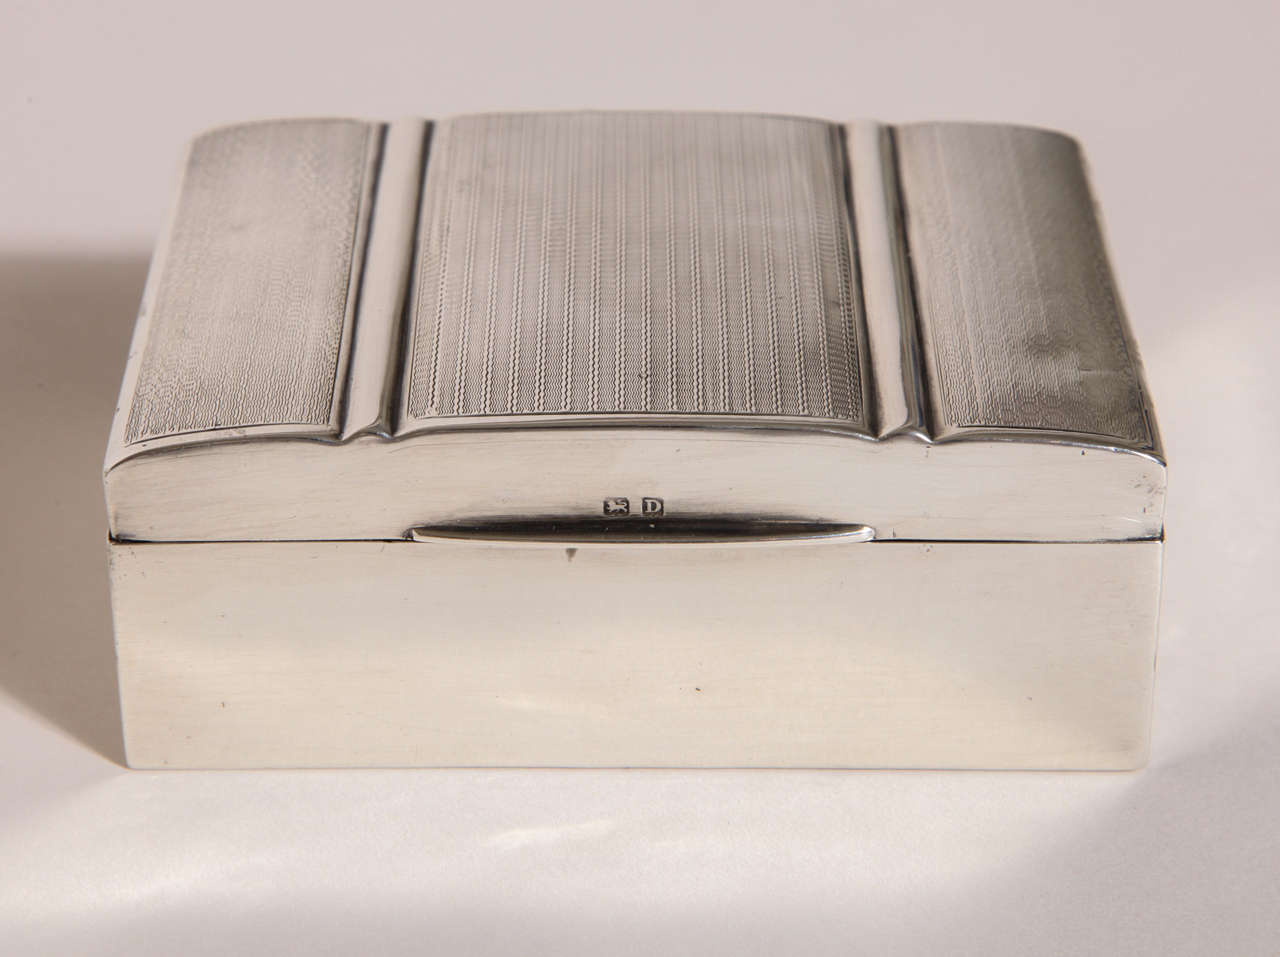 Sterling silver box with stylized Art Deco top with three sections decorated with engine-turned engraving and with cedar-lined interior.
Hallmarked for 925 silver/ Birmingham/ 1928/ HM.

12.15 ozs. gross.